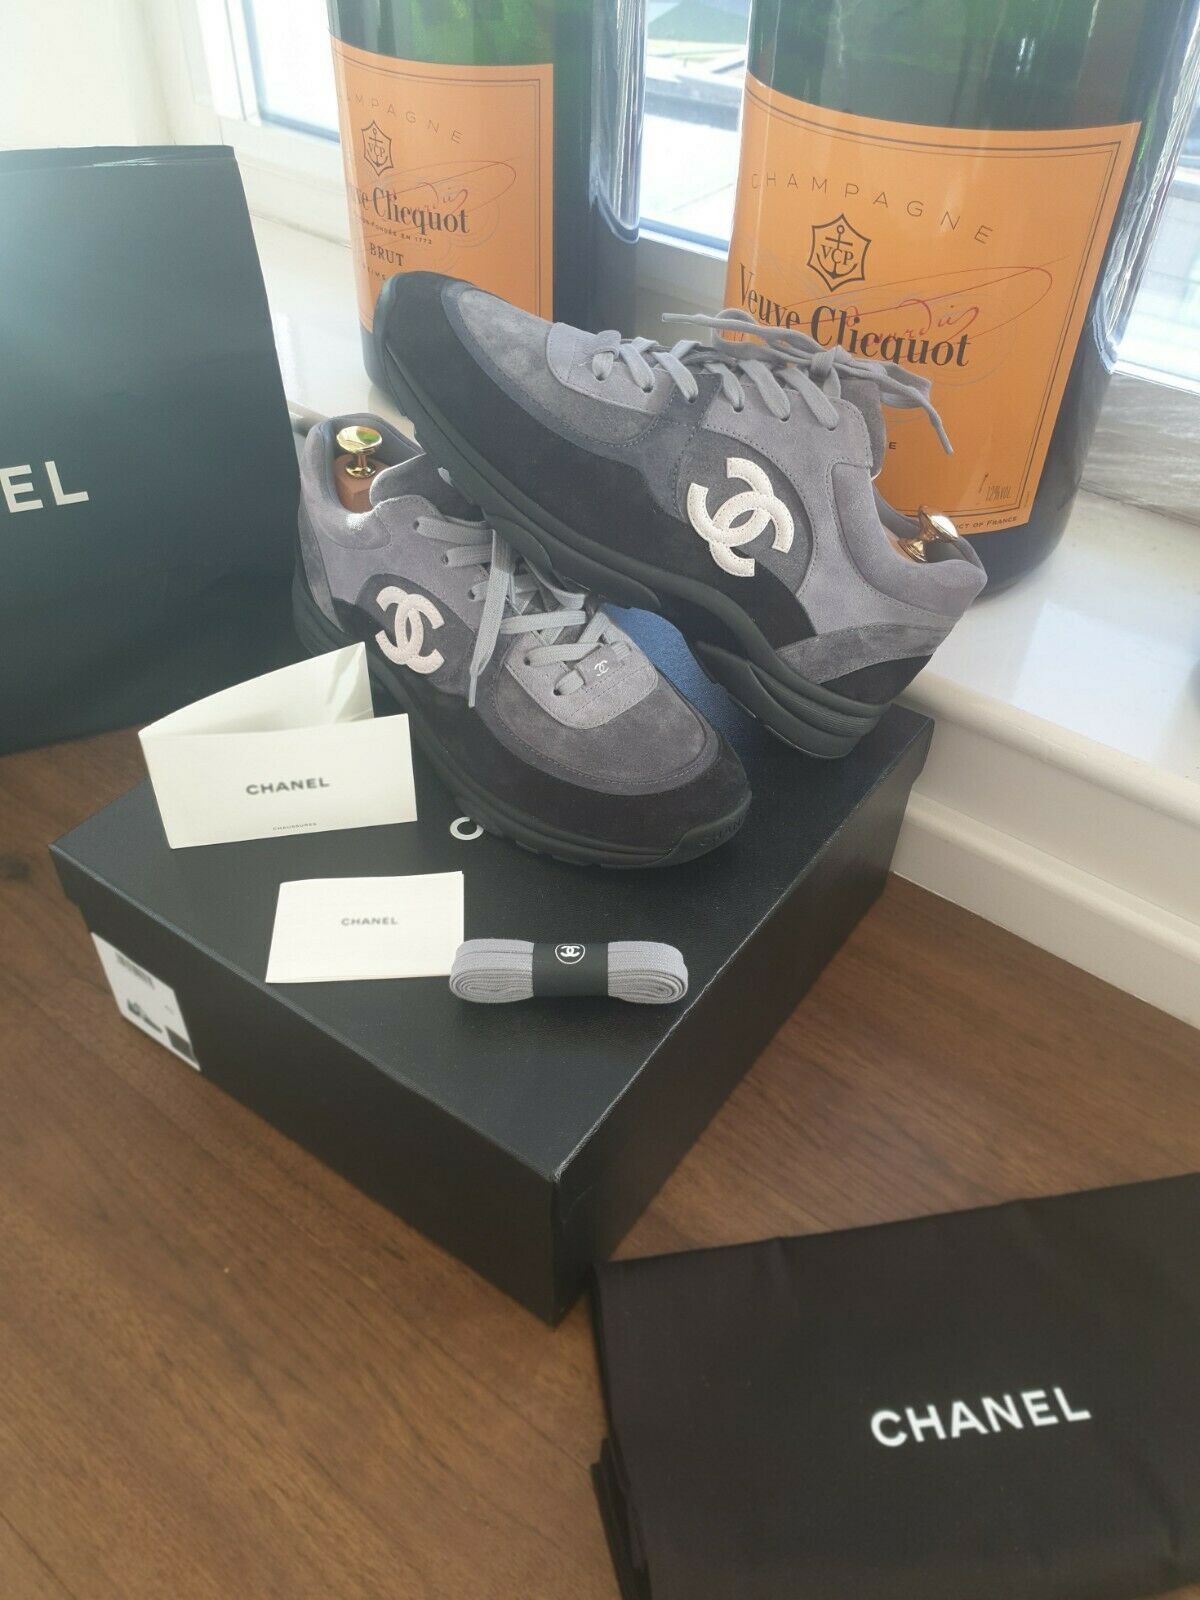 Chanel NEW Chanel CC Race Runner Sneakers 43 Shoes Grey Suede Size US 10 / EU 43 - 2 Preview